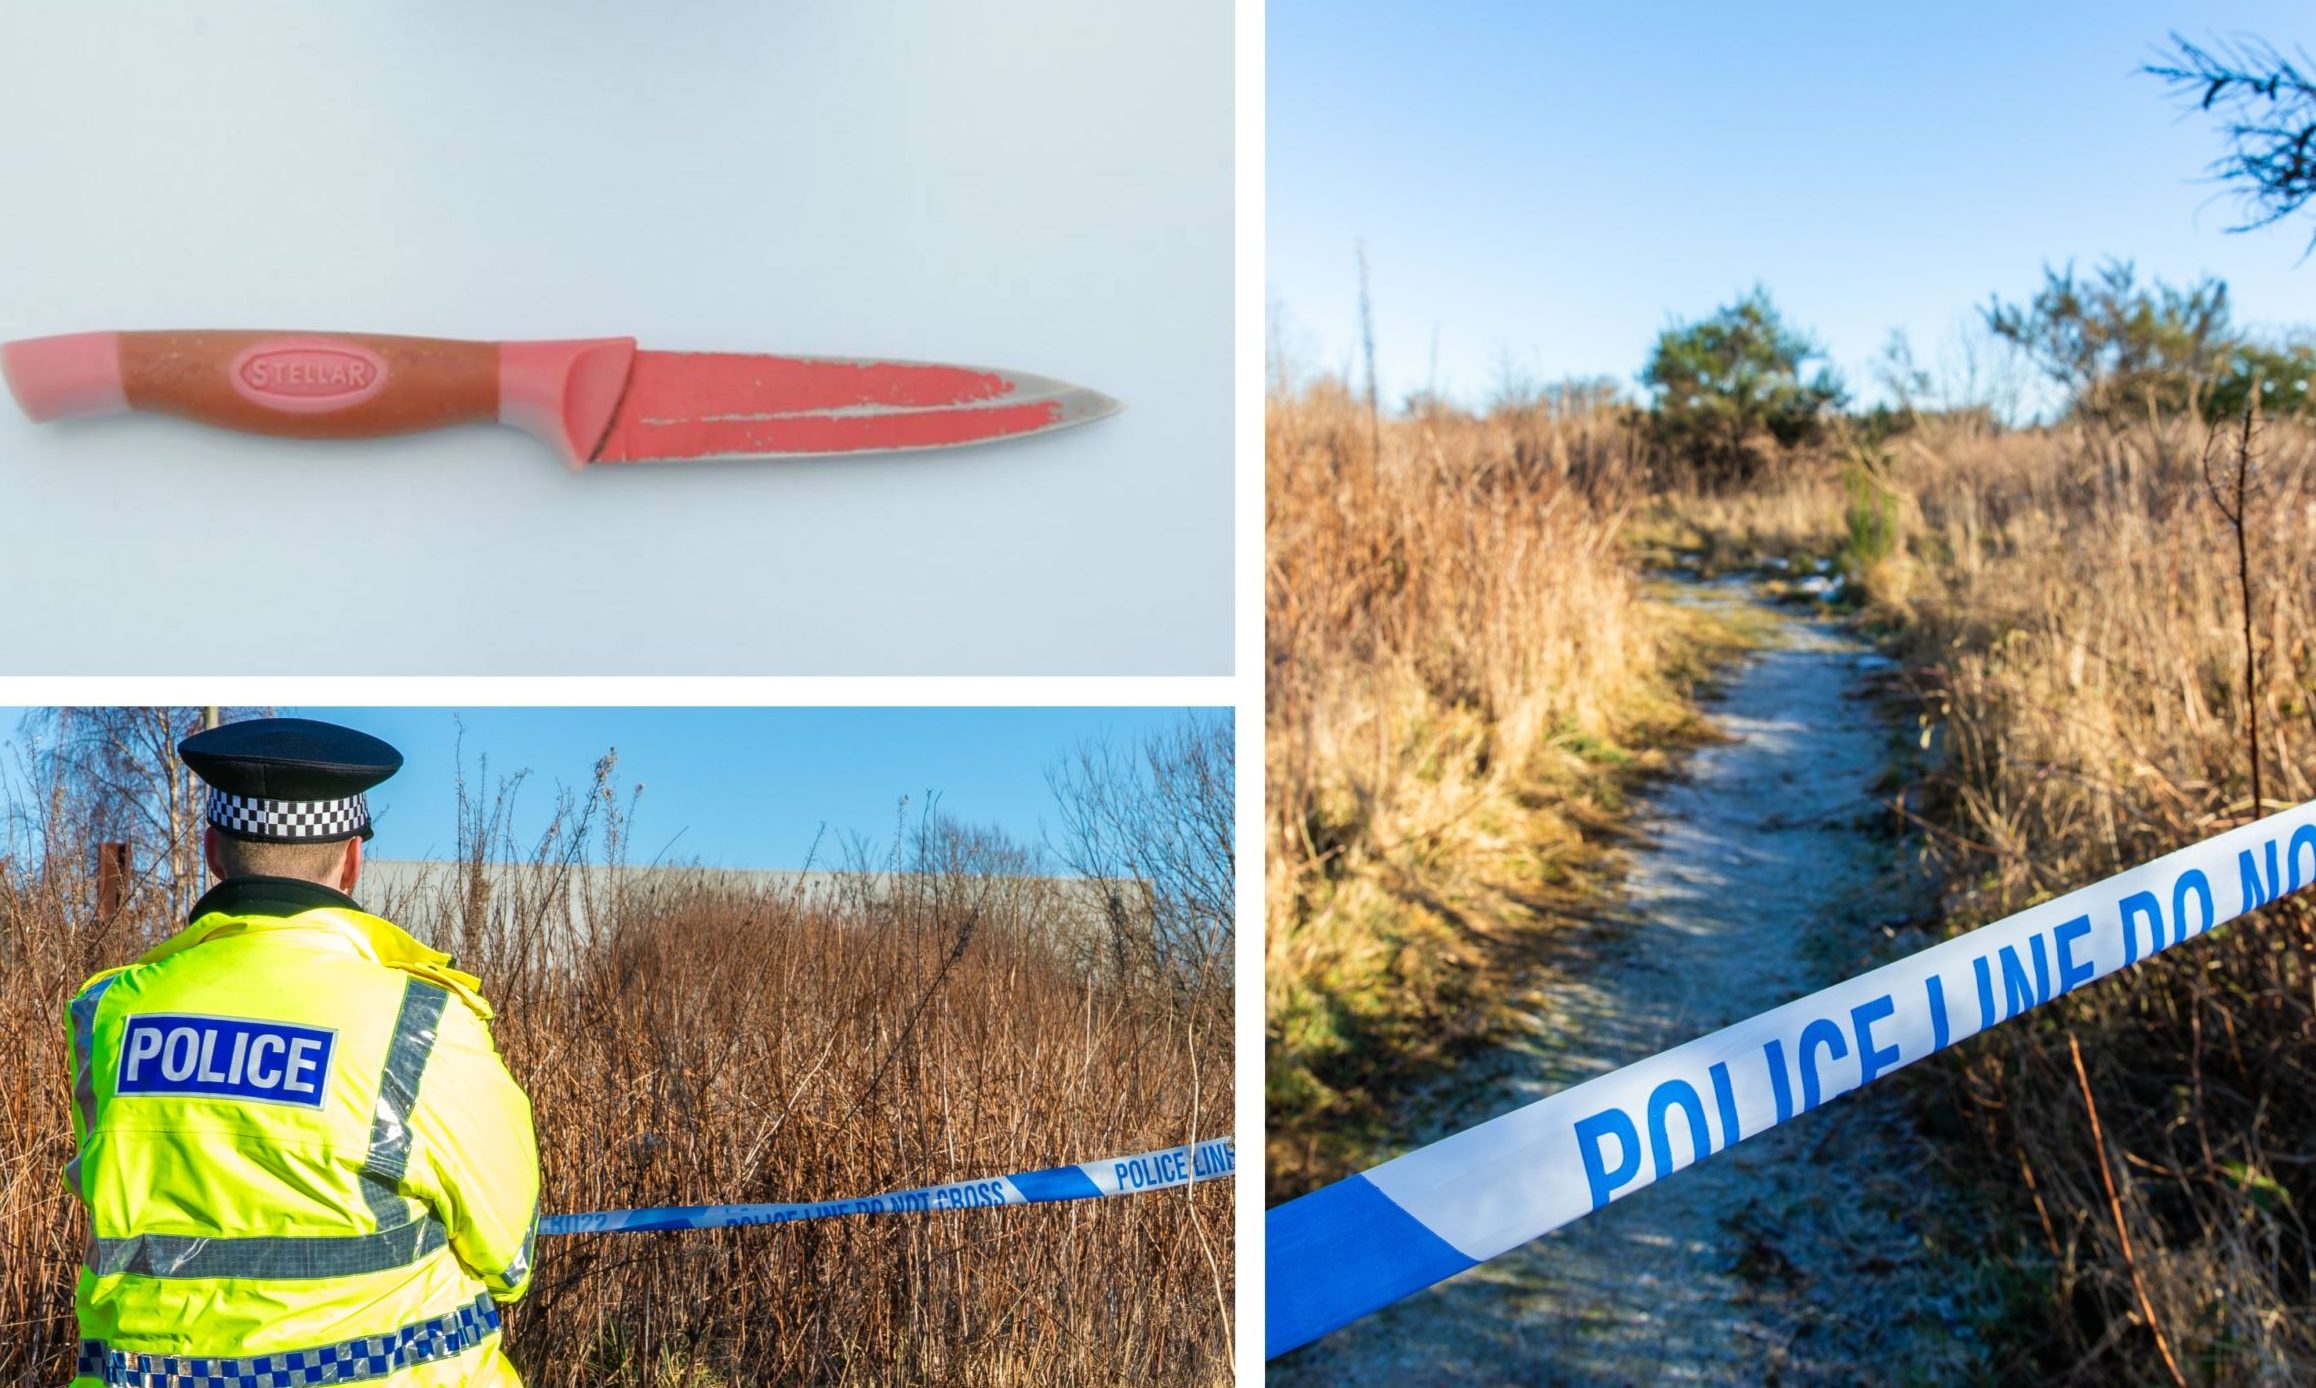 The knife used in the attack and police at the scene of the crime in Methil.